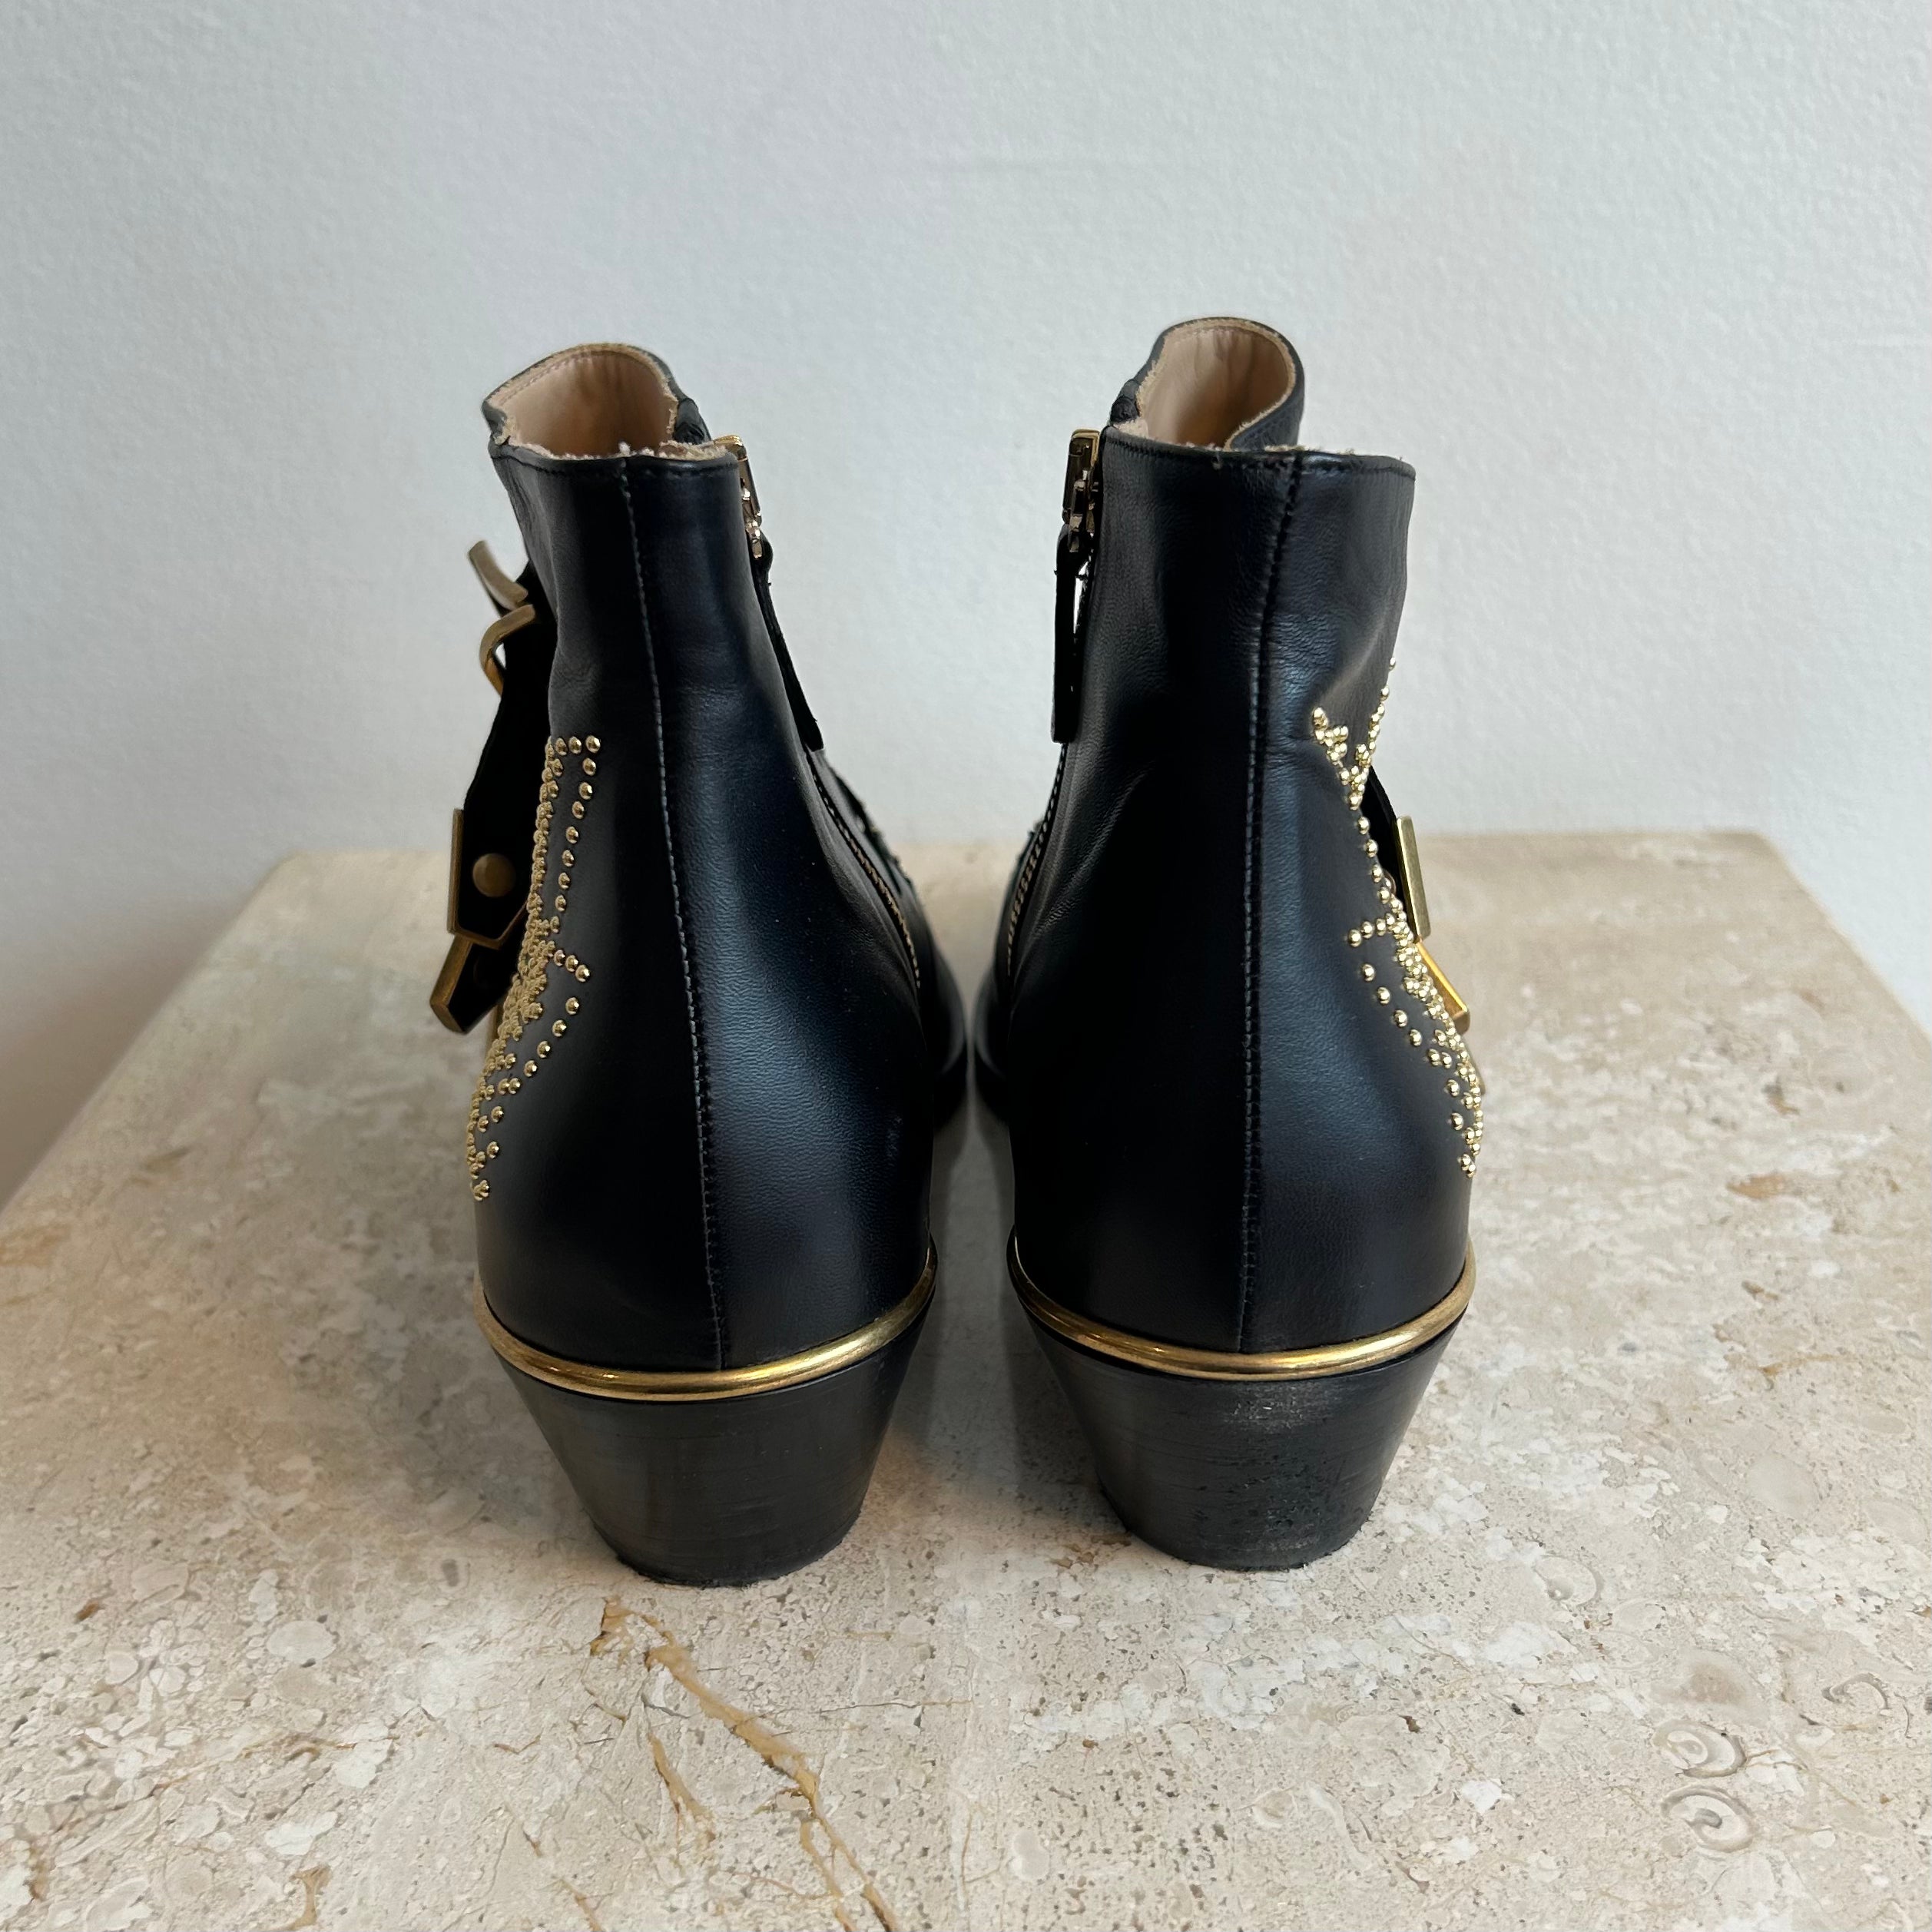 Pre-Owned CHLOE Black/Gold Susanna Short Boots - Size 38.5